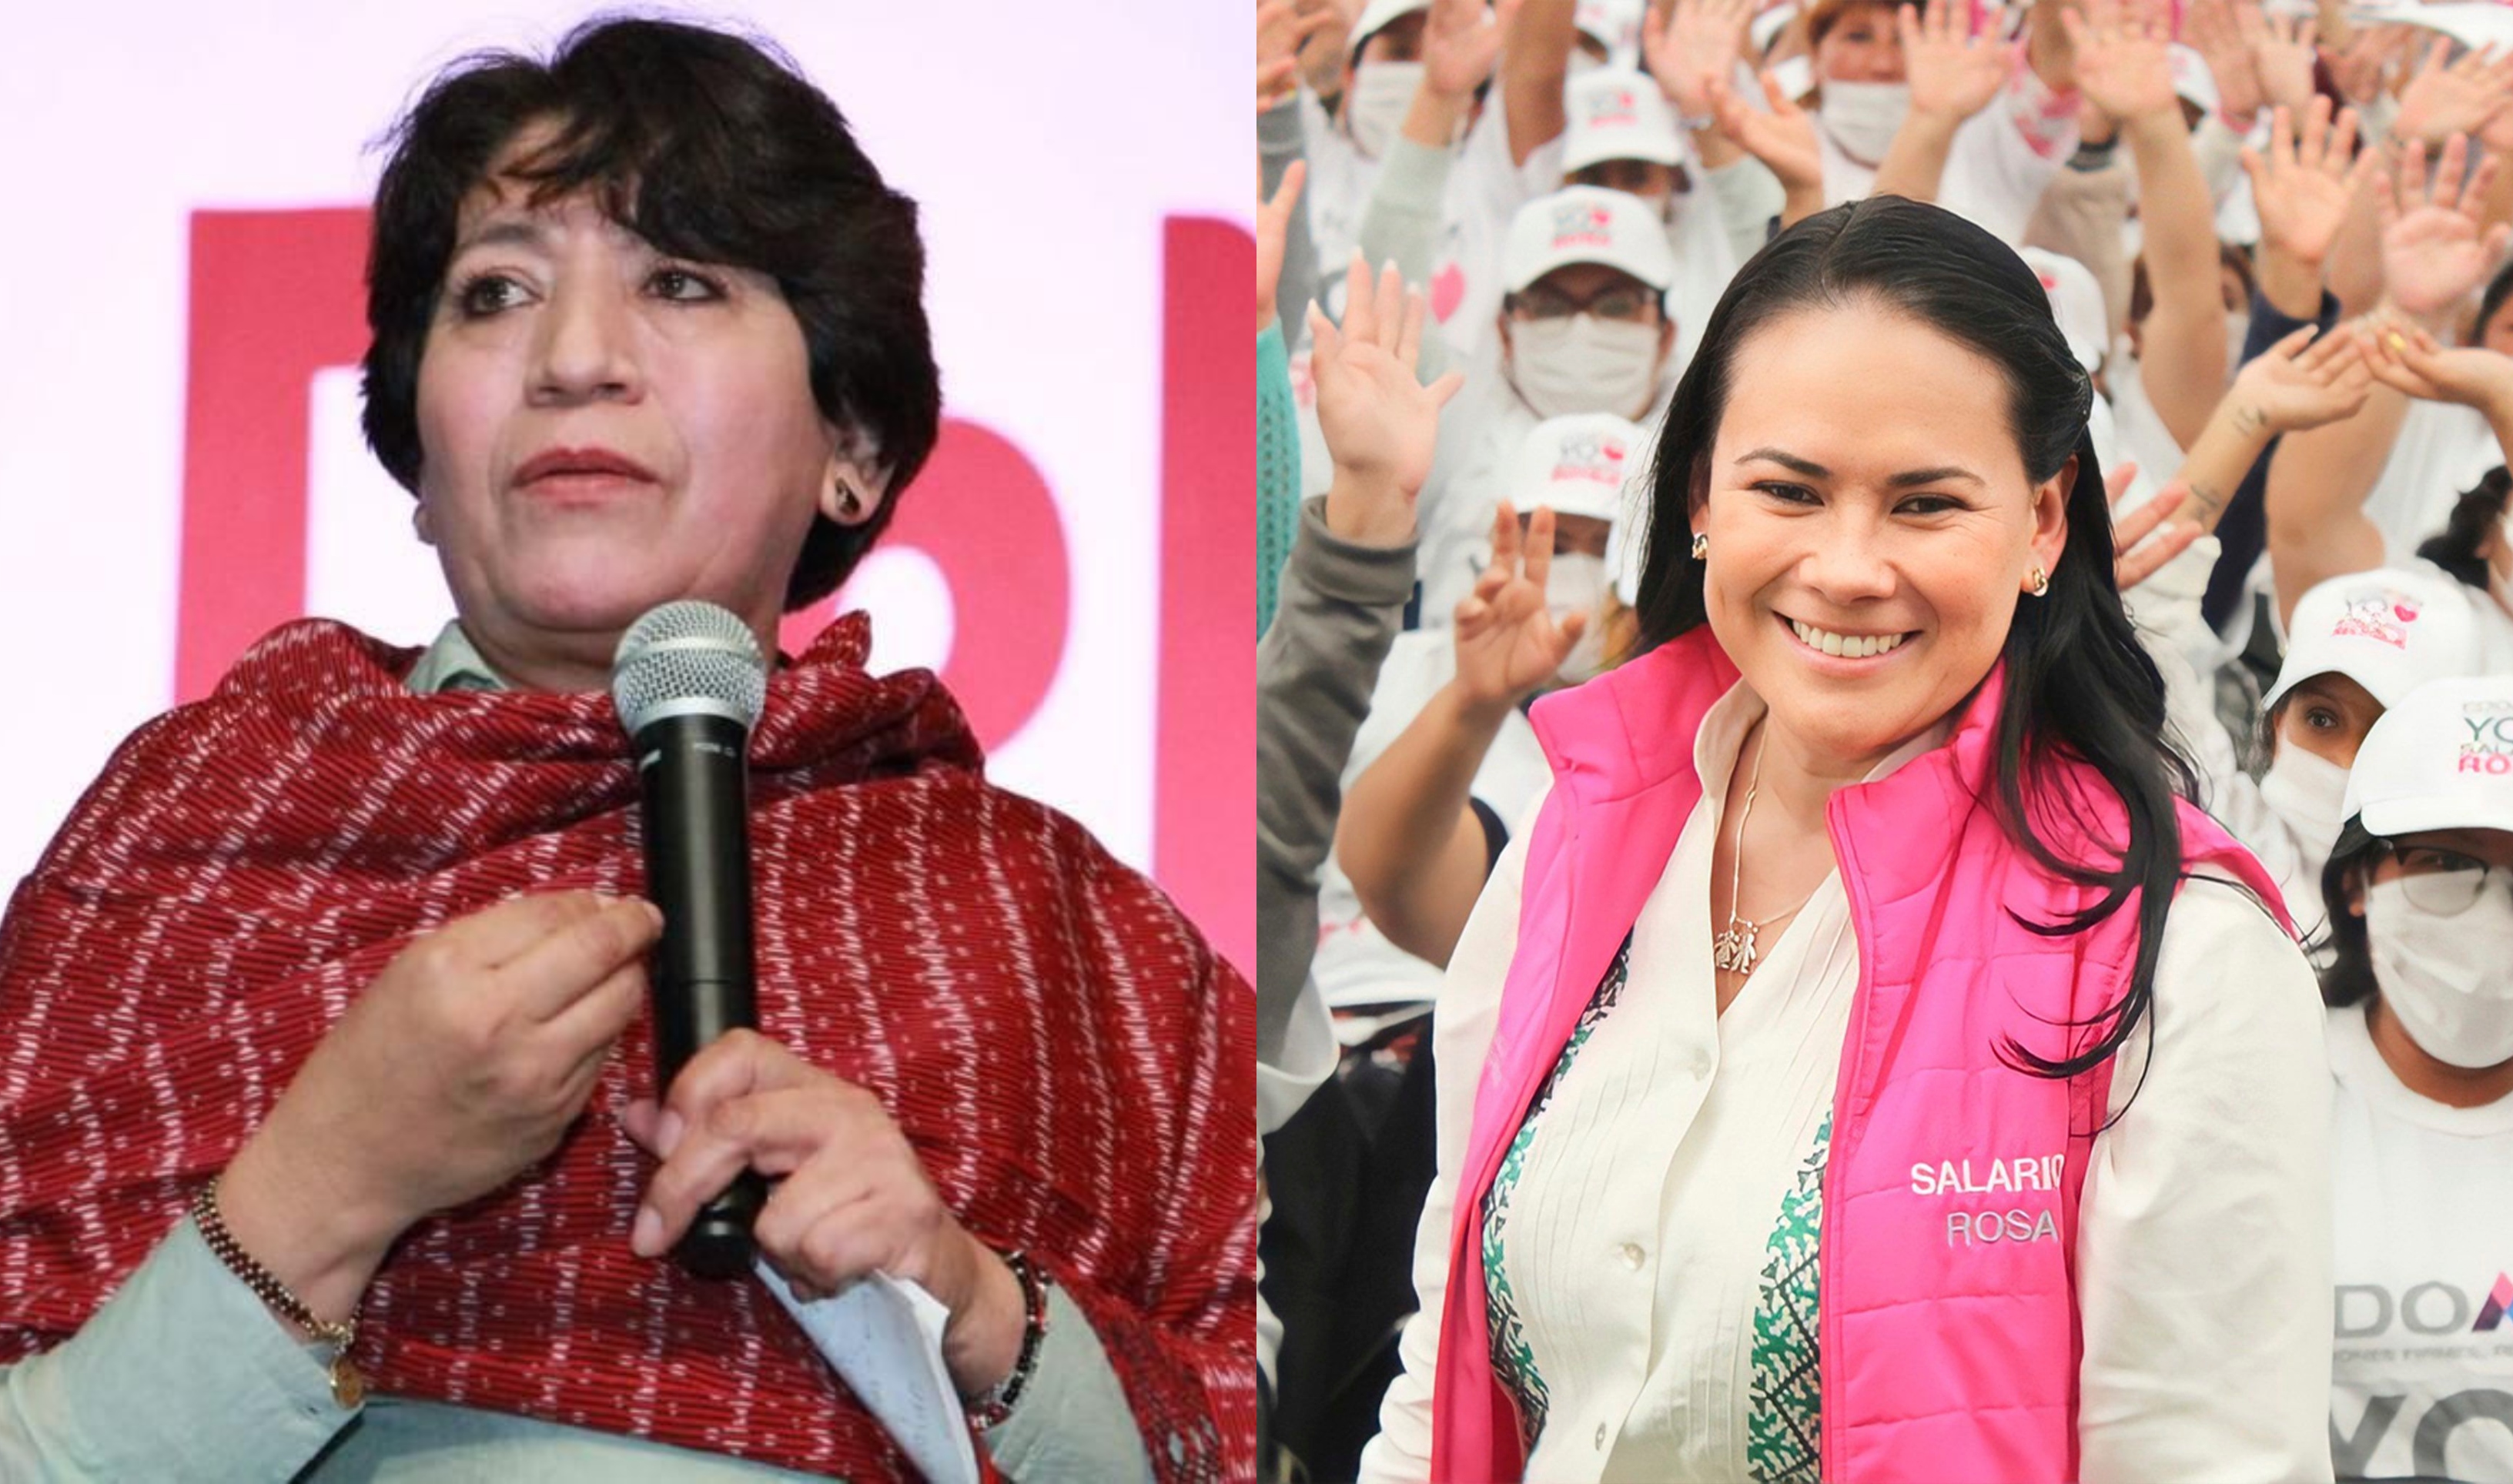 Alejandra del Moral and Delfina Gómez joined the race for the governorship of the State of Mexico in the 2023 electoral elections (Twitter/@AlejandraDMV / @Delfinagomez)